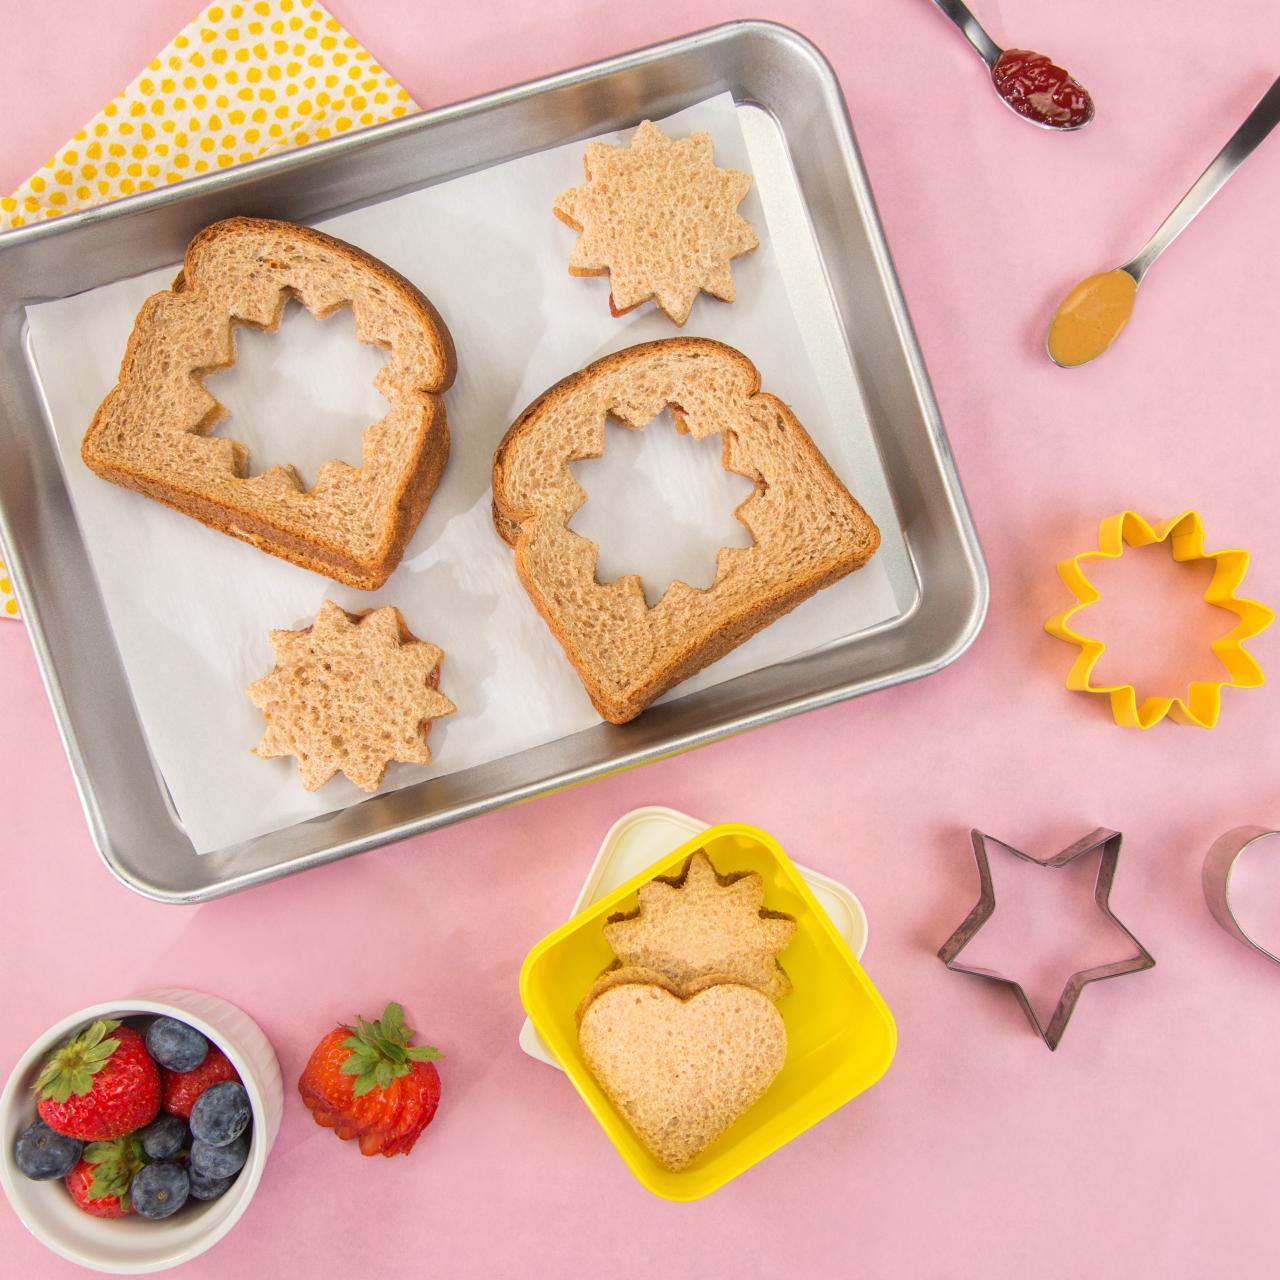 25 School-Approved Healthy Snacks for Kids